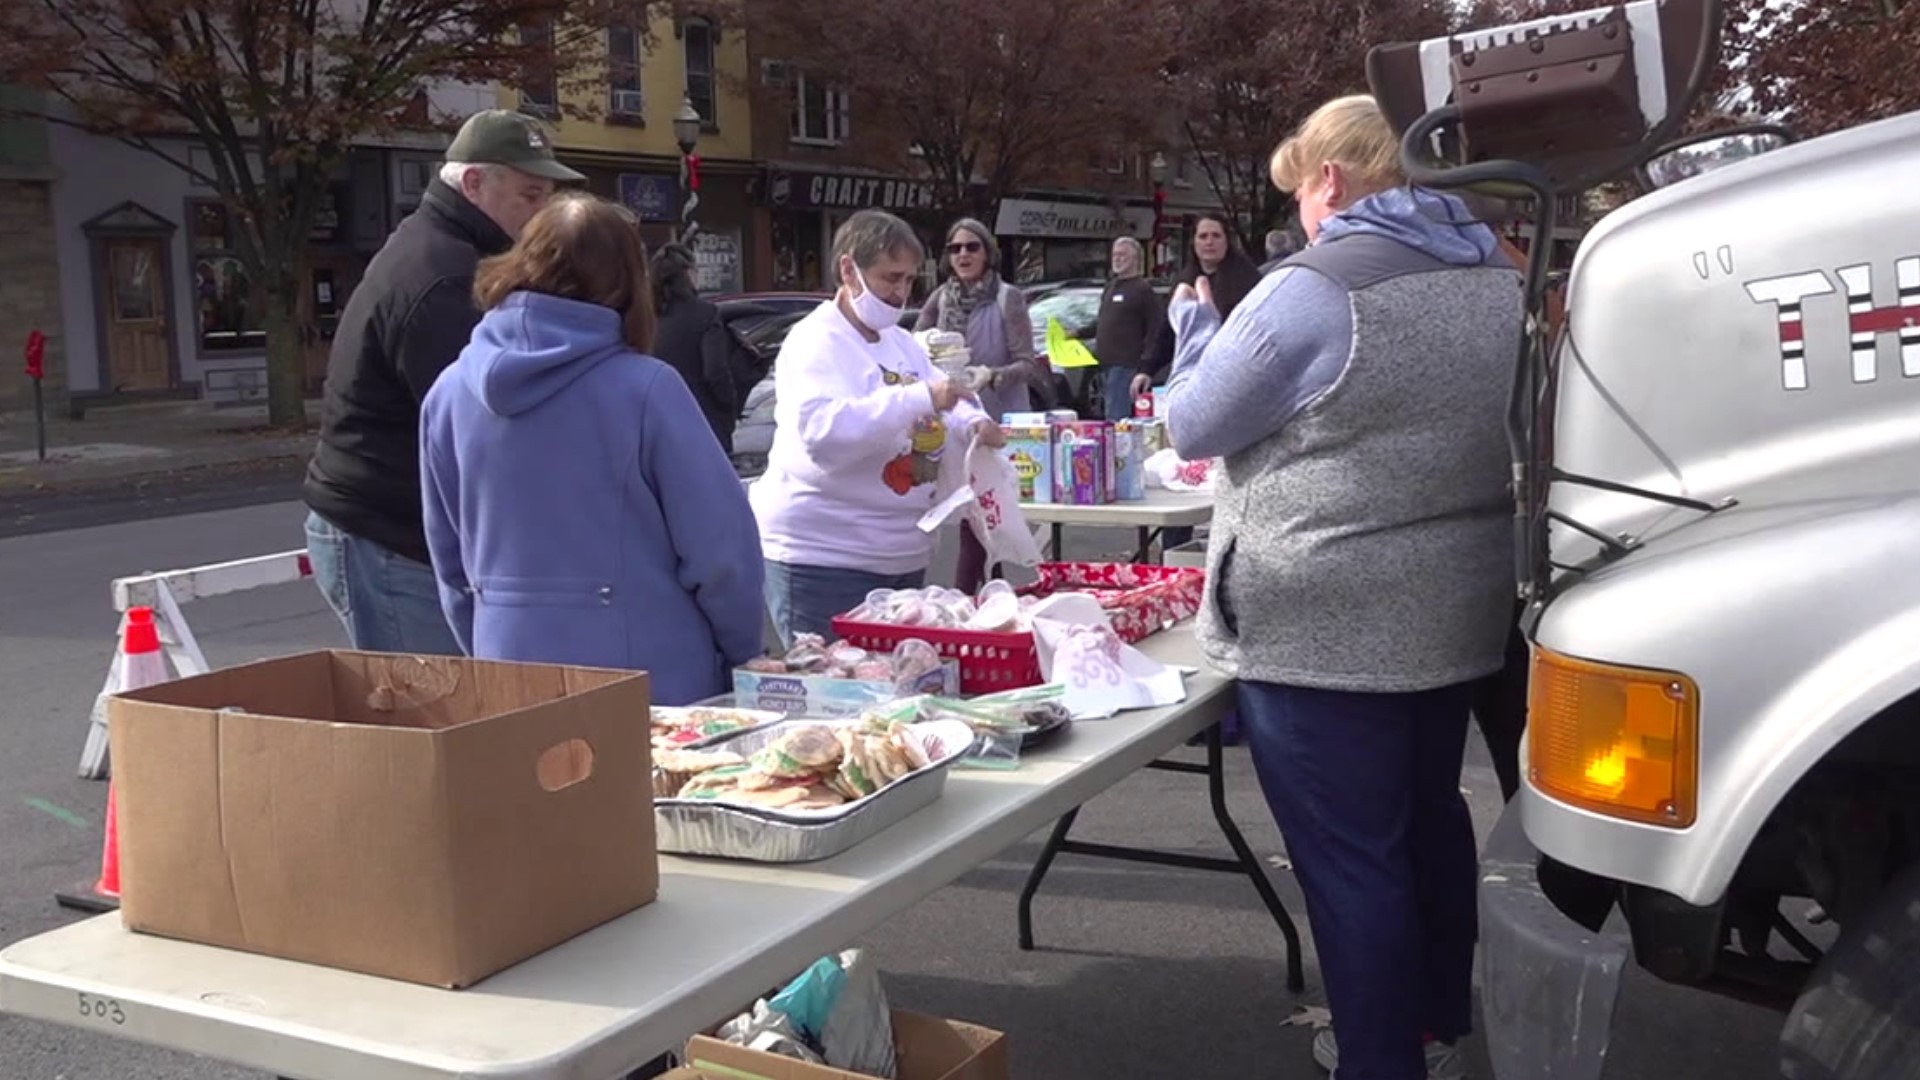 Rhonda Fisher serves Thanksgiving dinner to hundreds of people in the Sunbury area.